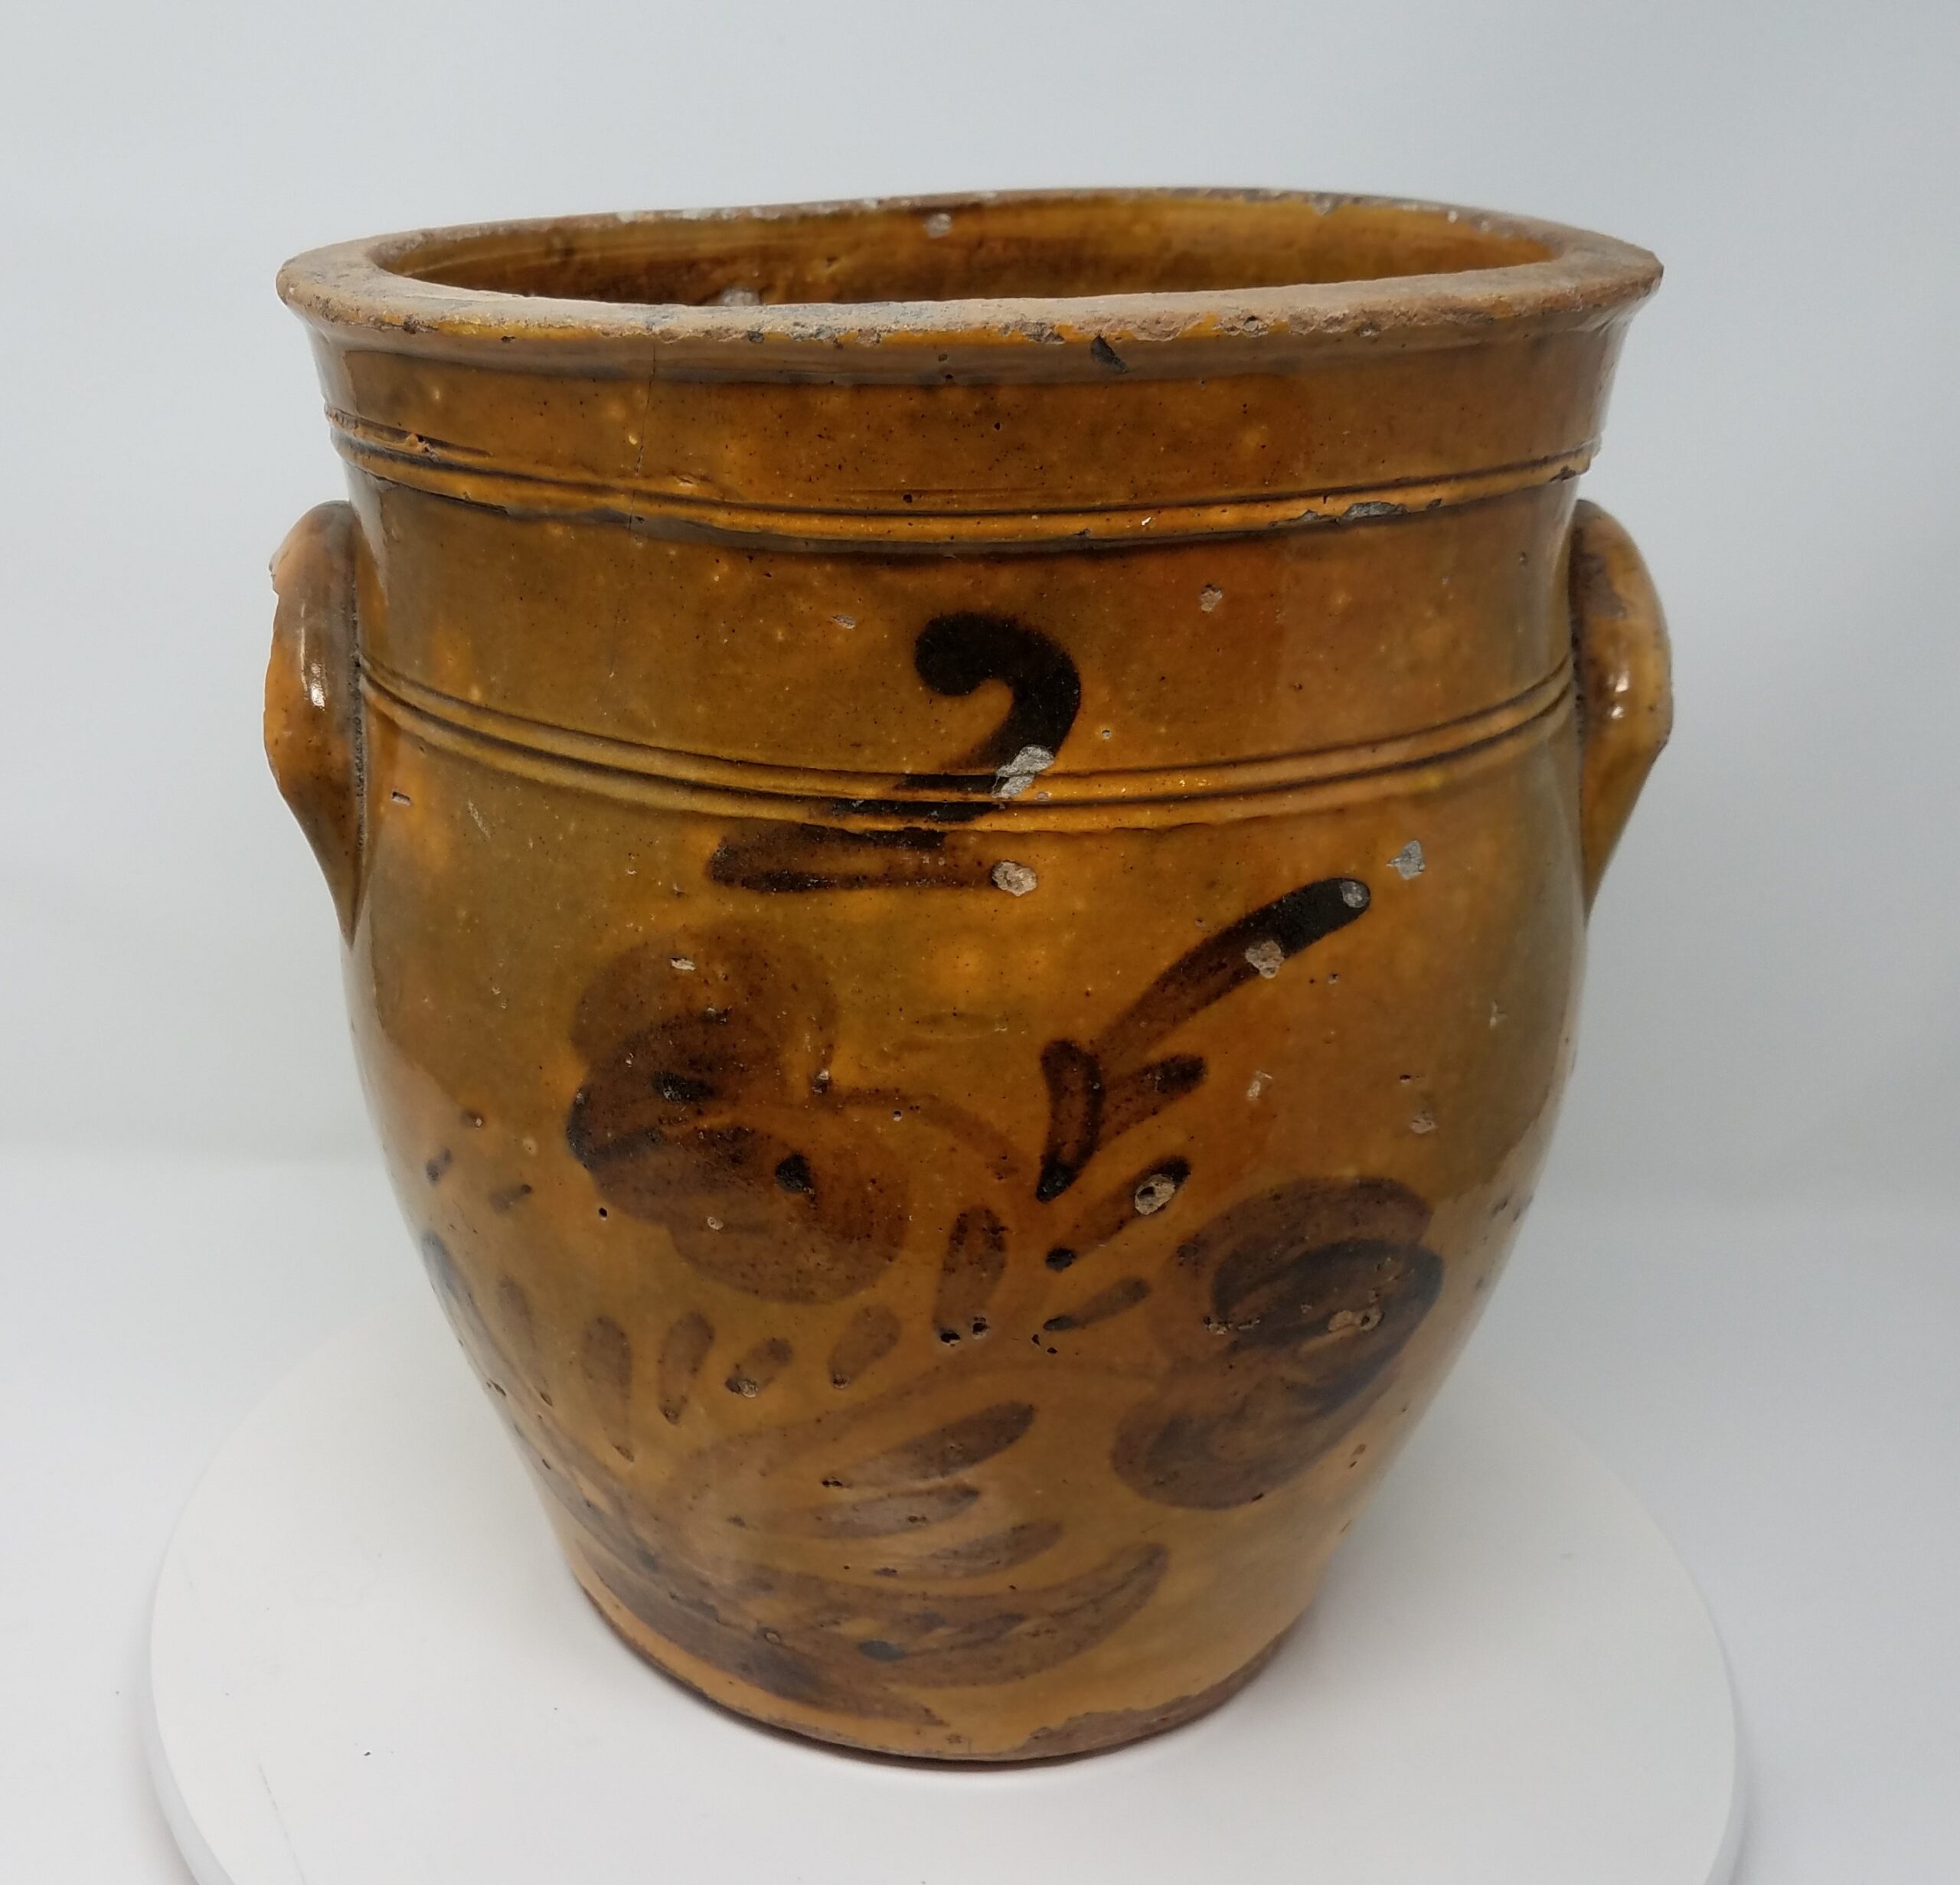 Two-gallon cream pot with a distinctive glaze, form and decoration. This could be an 1840's or early 1850's Cravath Pottery piece.